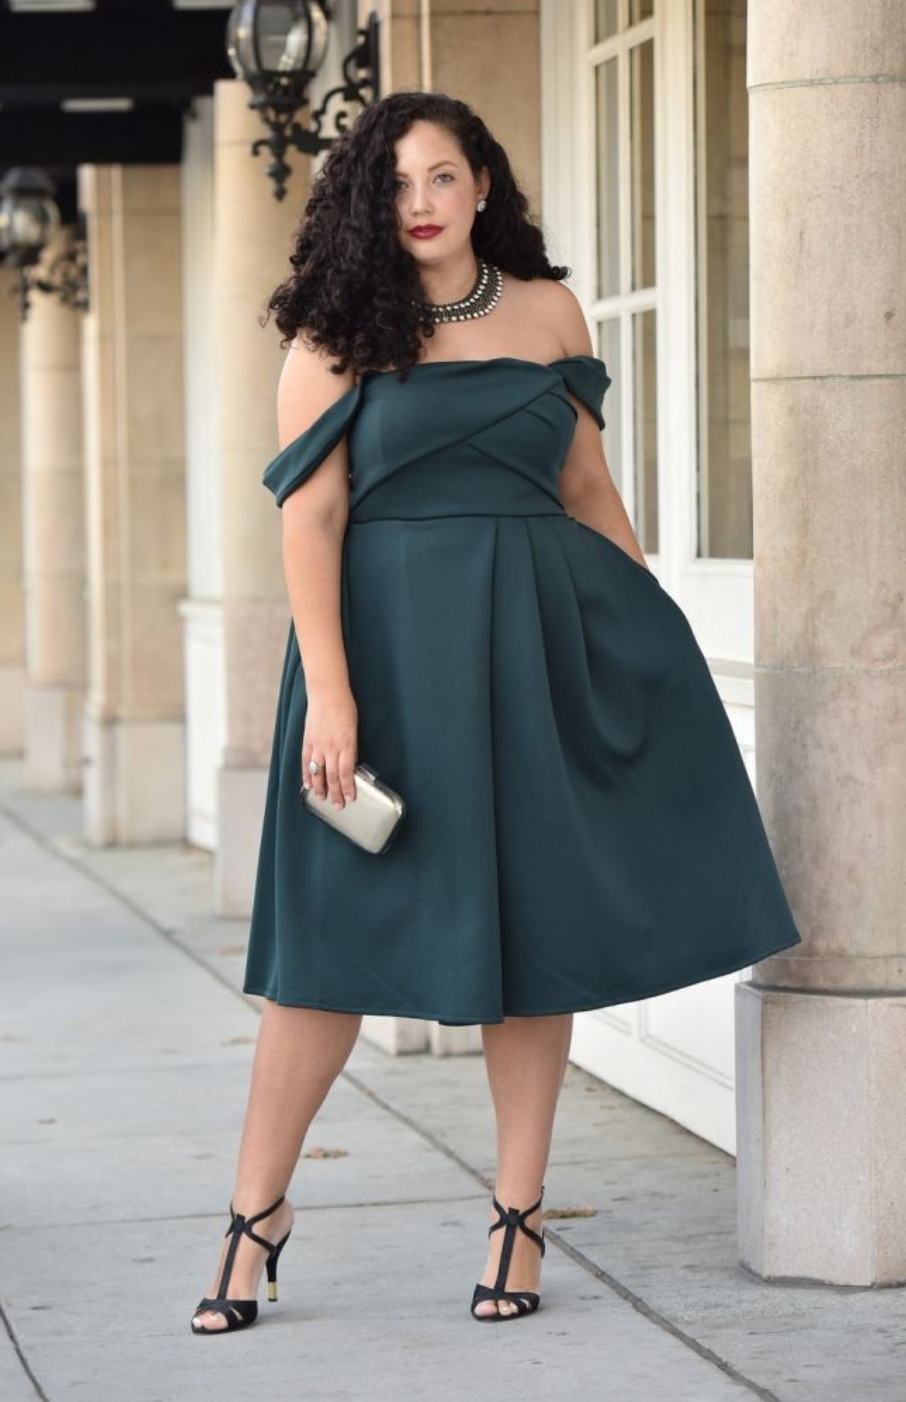 Trendy Outfits For Curvy Women